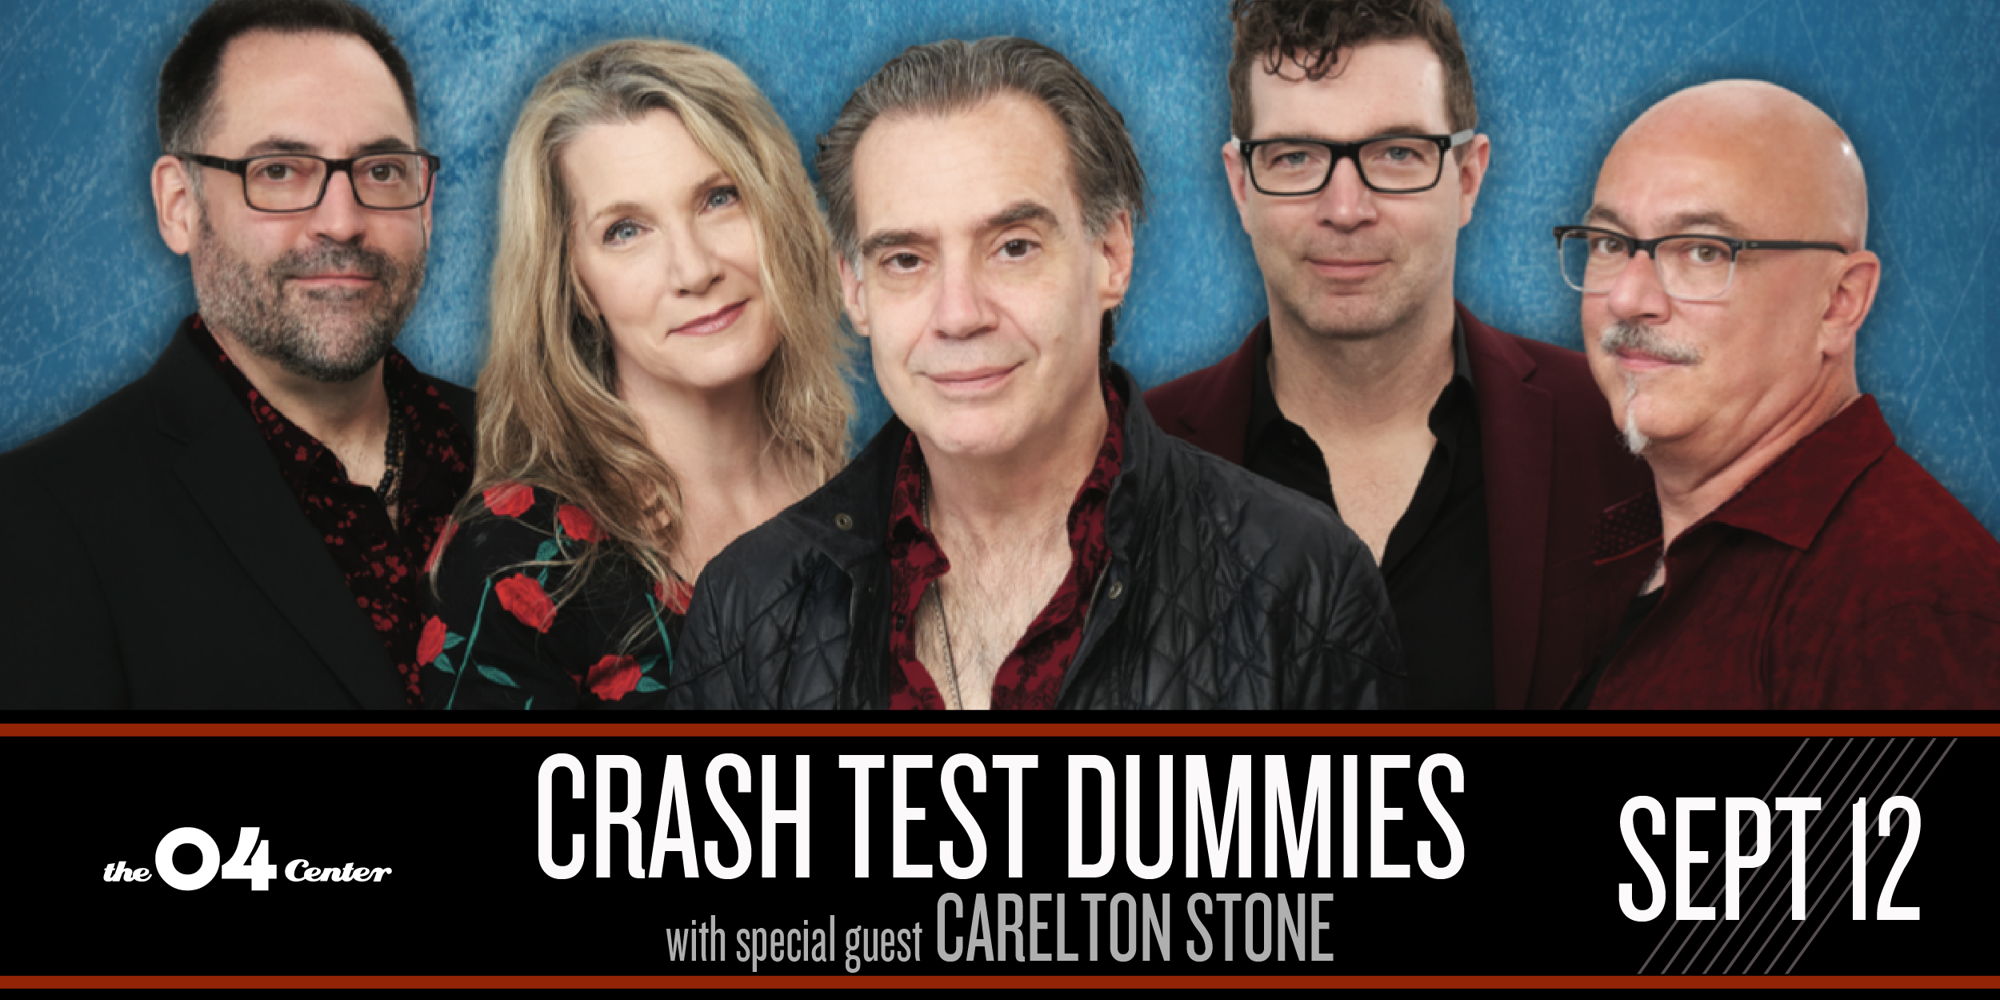 Crash Test Dummies with special guest Carelton Stone promotional image